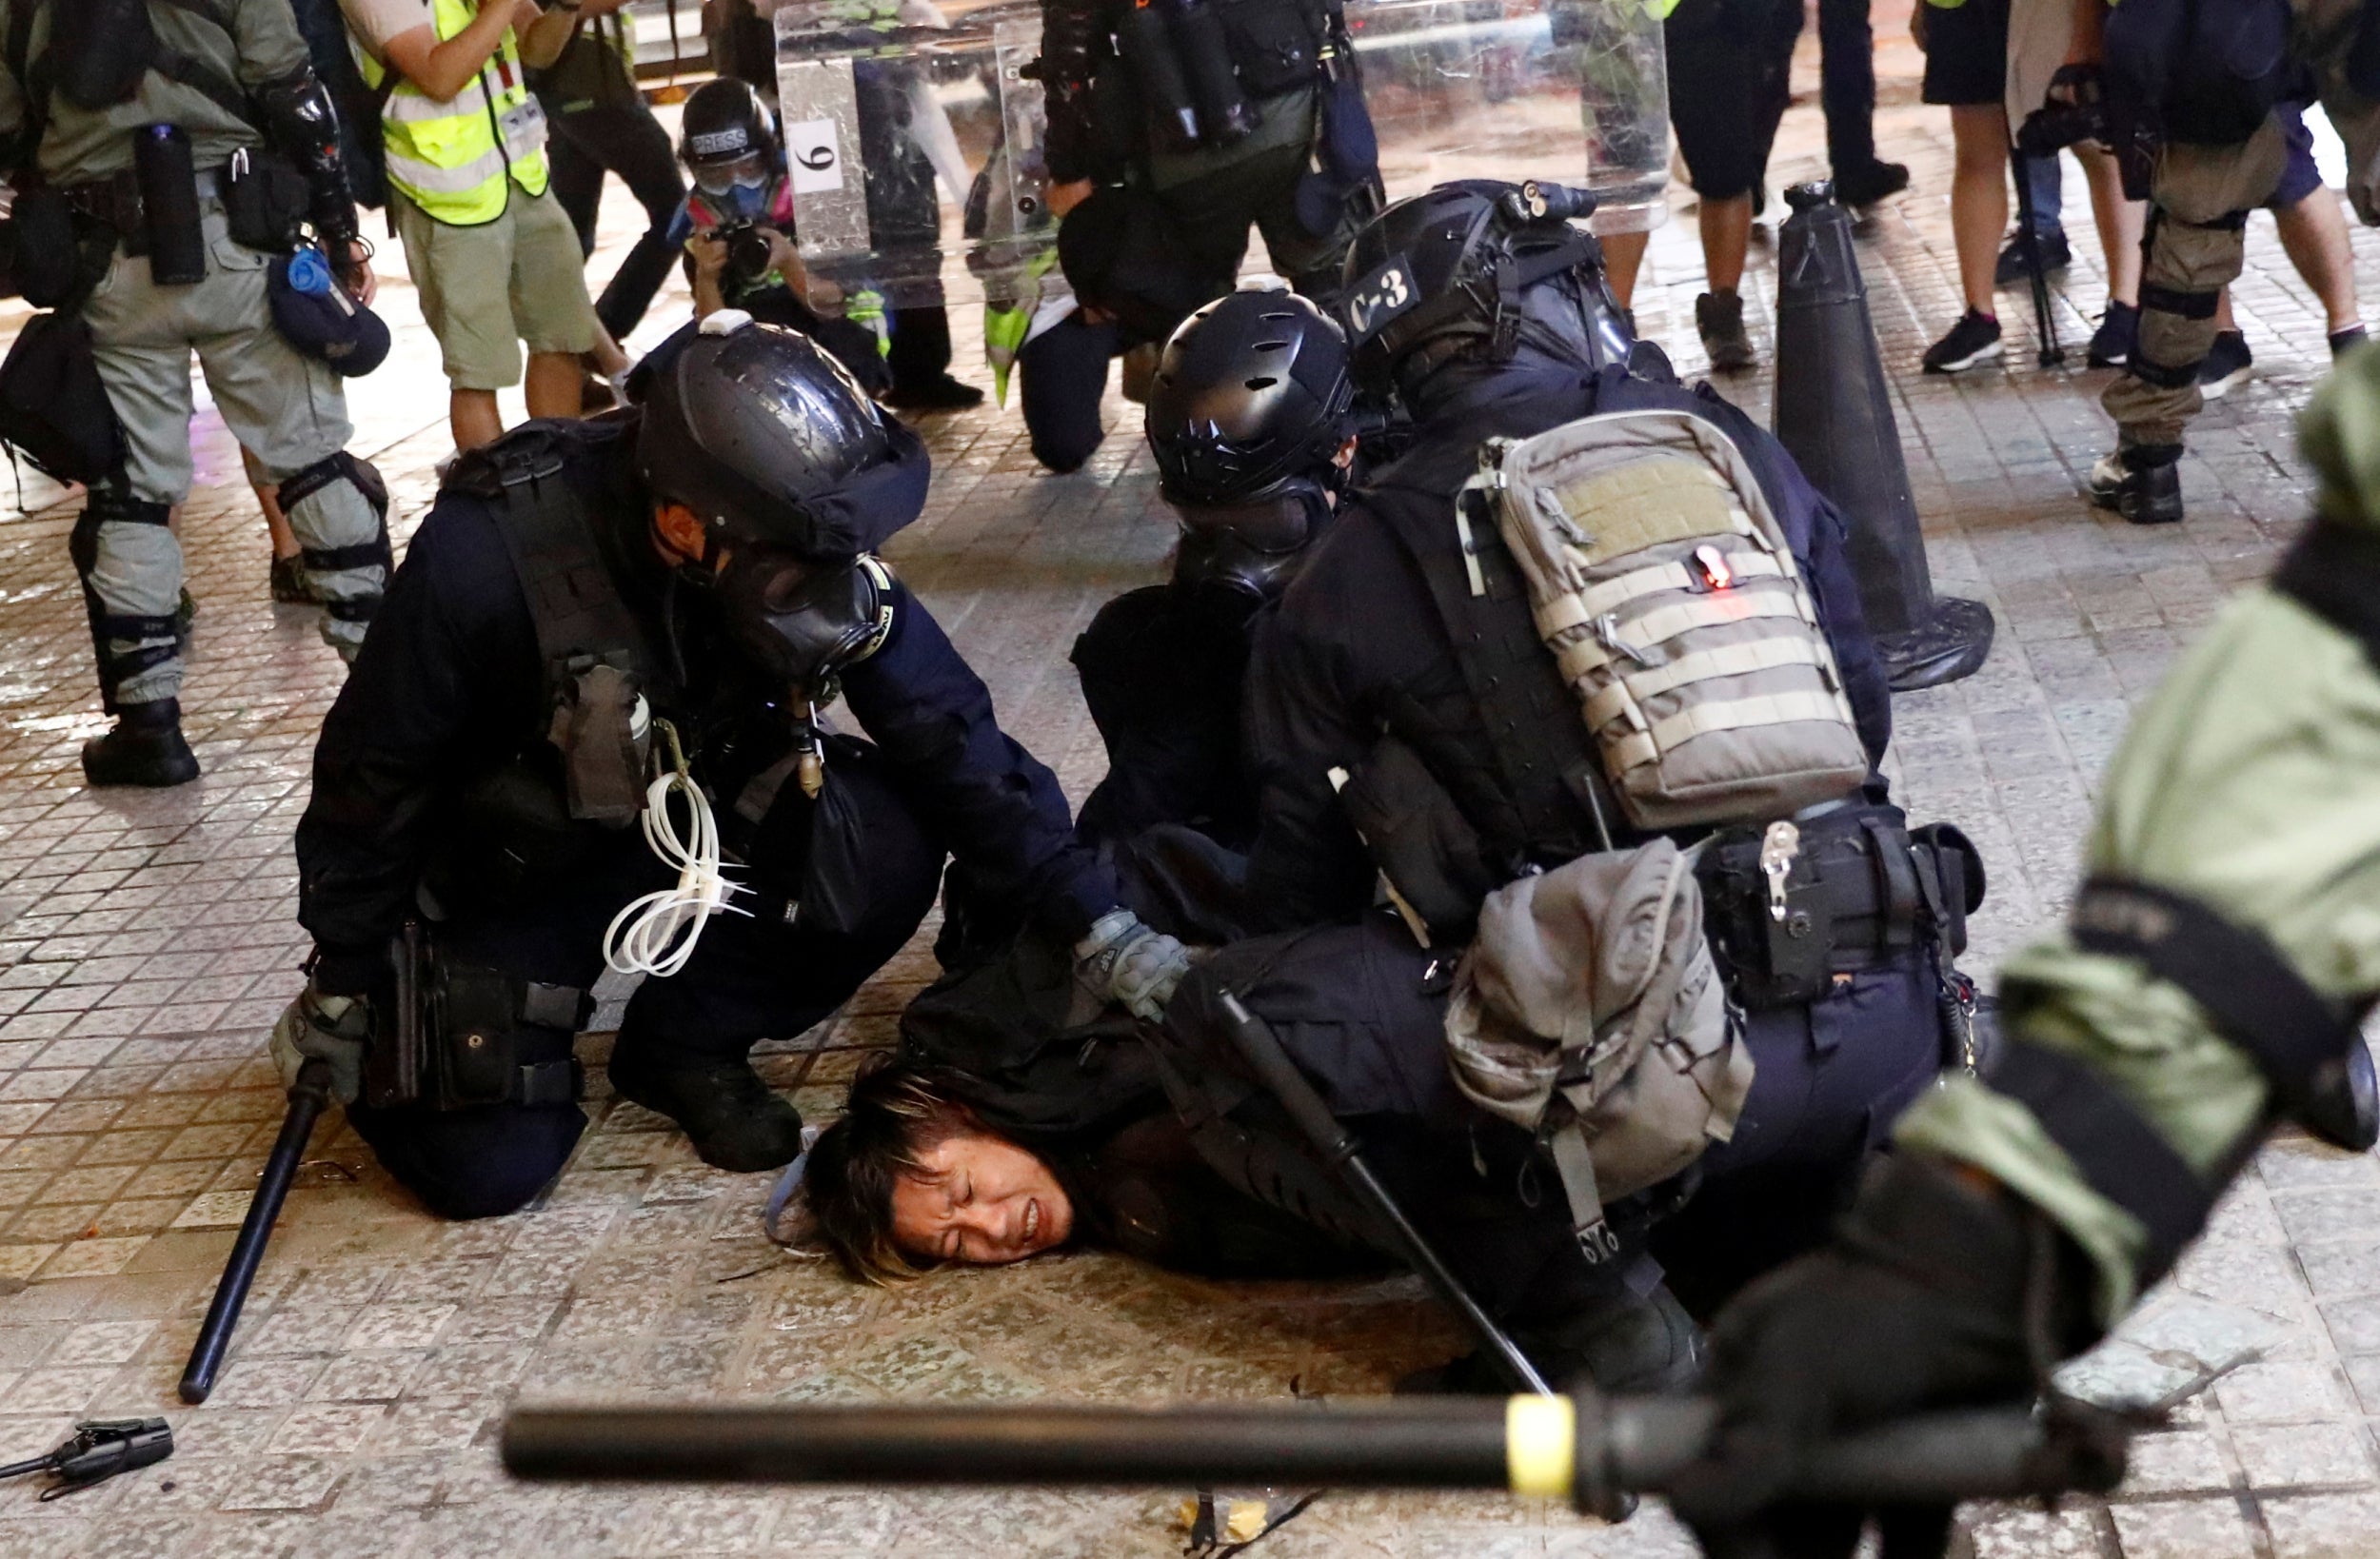 A demonstrator is detained by police officers during a protest in Hong Kong (Reuters)